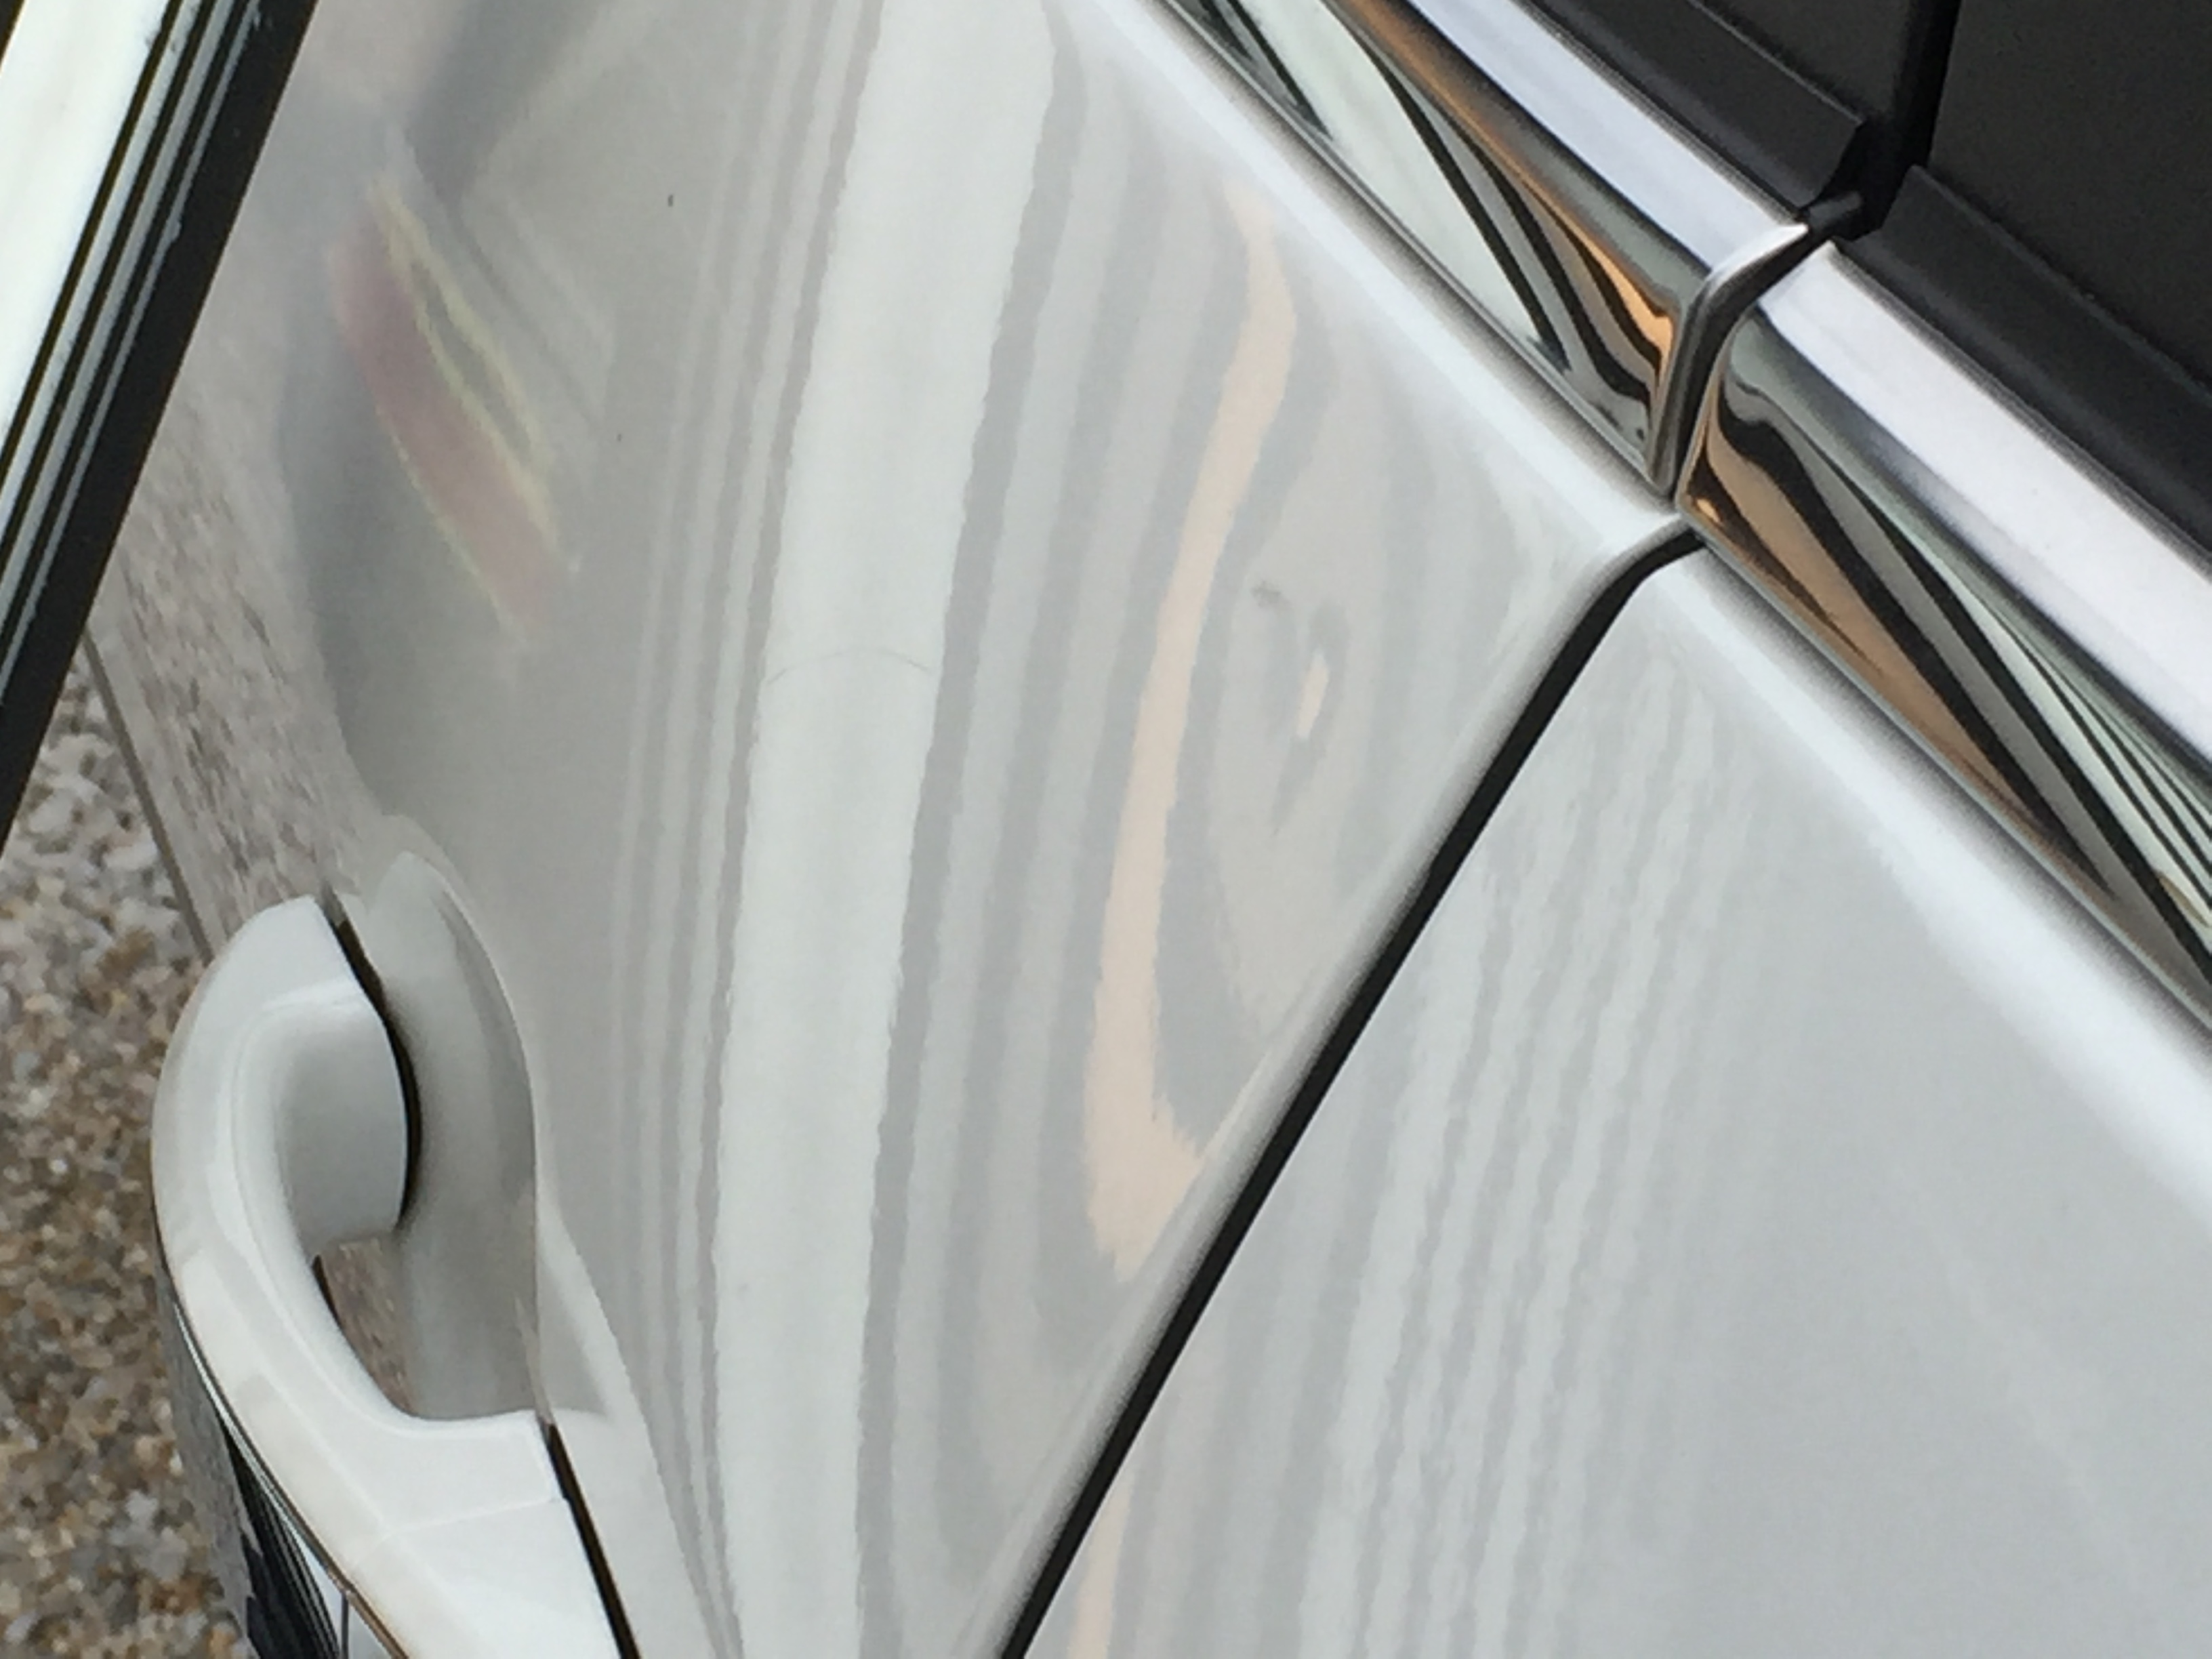 2015 Buick Encore, Dent Removal, Pana, IL. Dent in drivers door, http://217dent.com